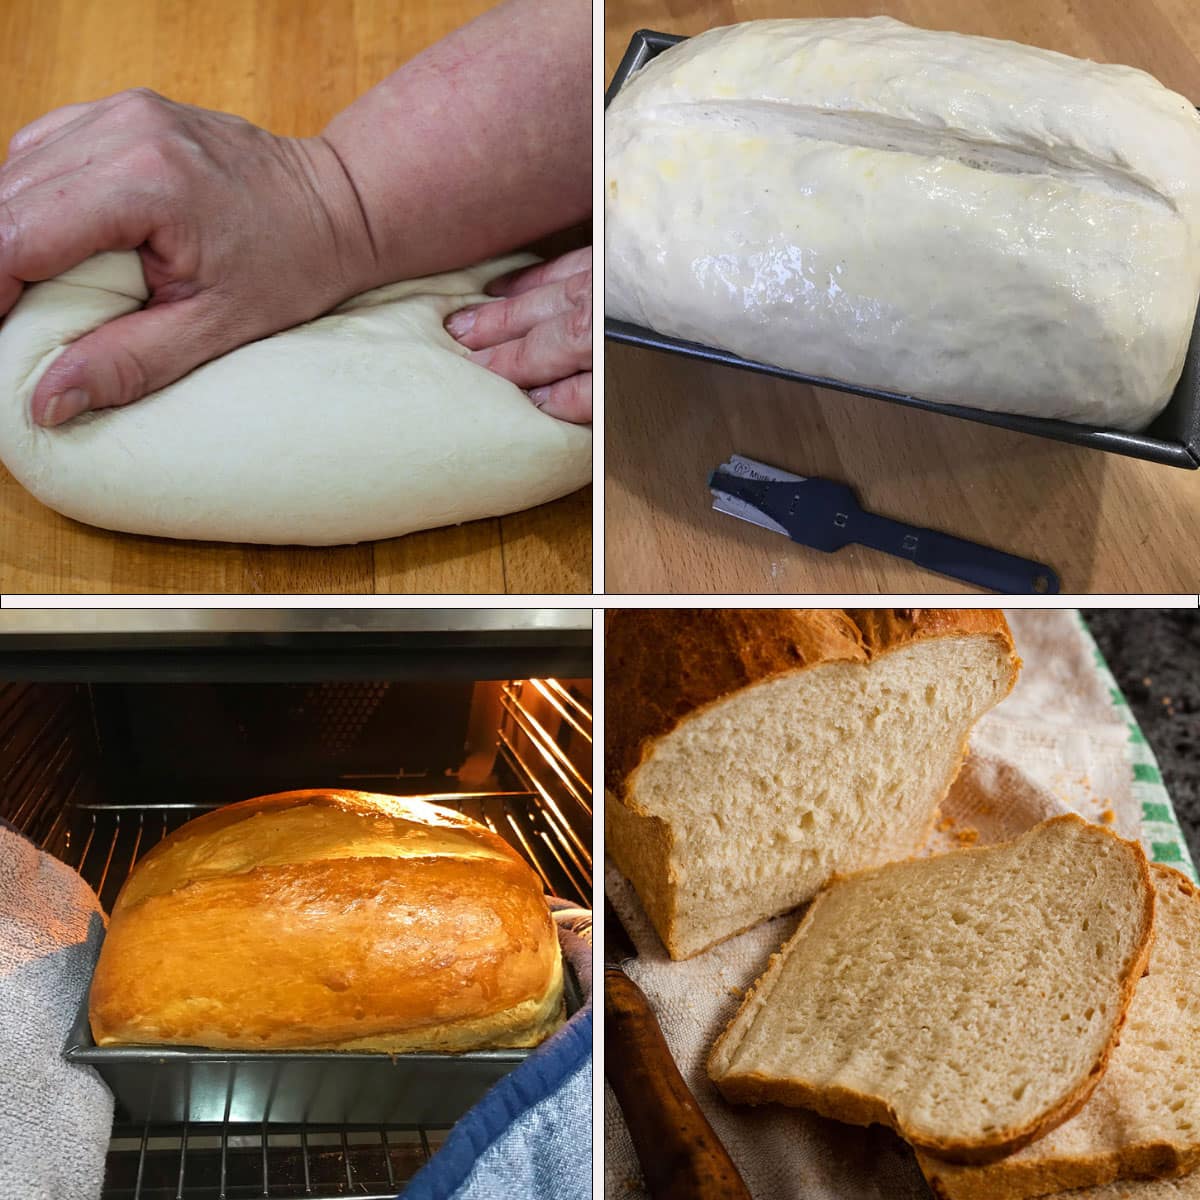 How to make great homemade bread